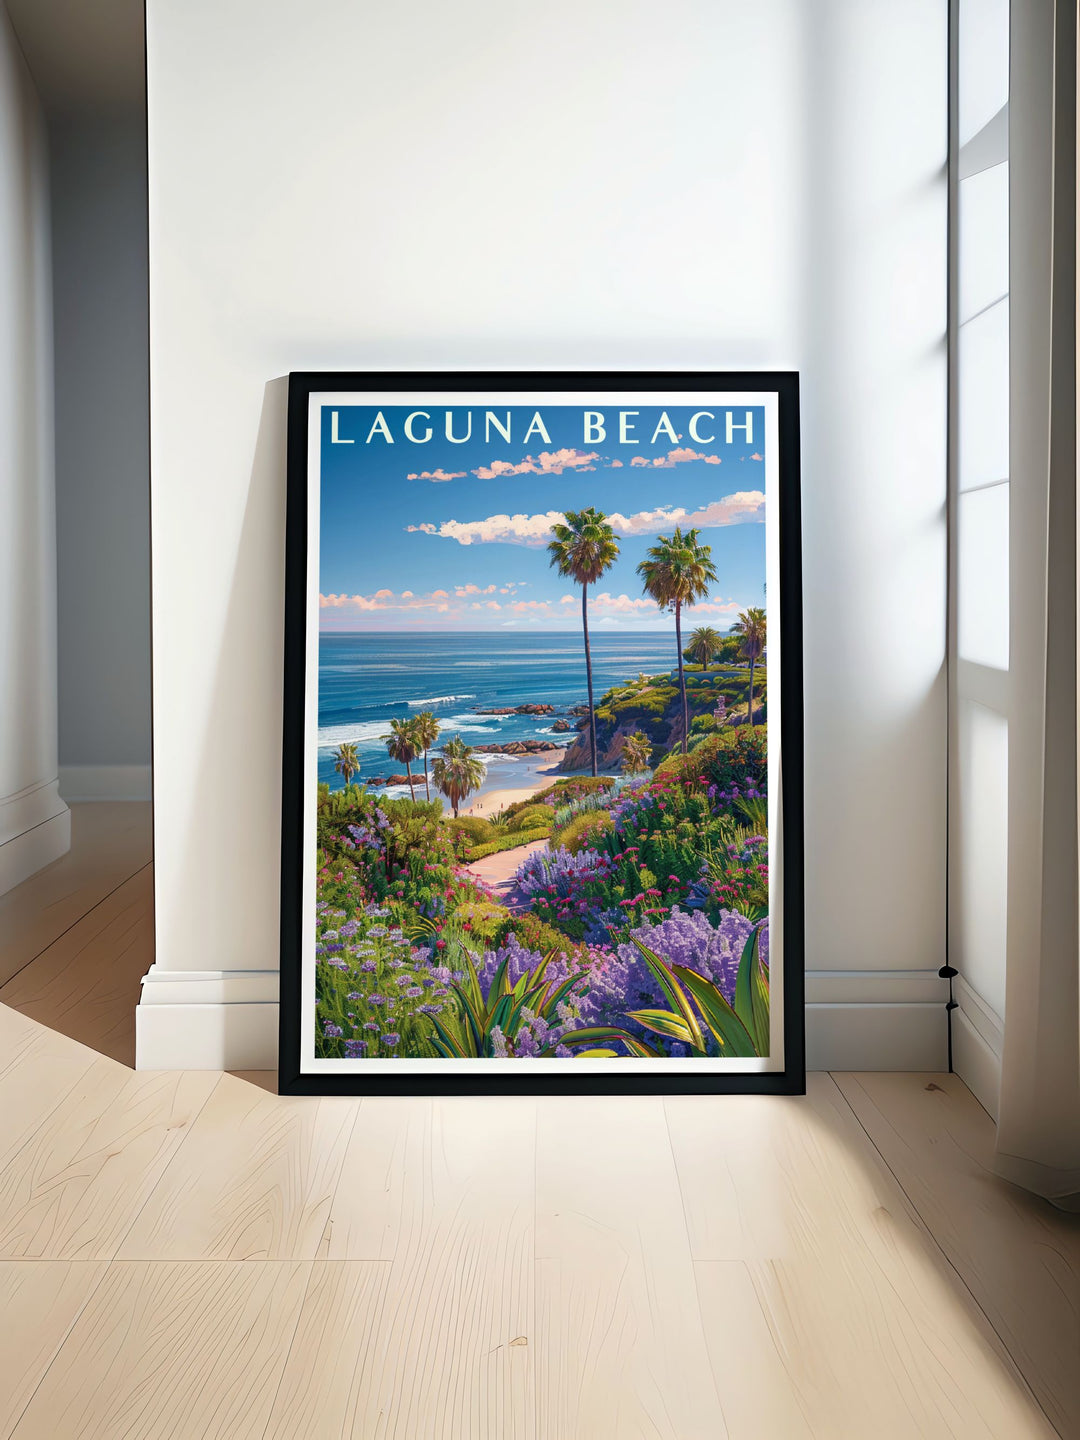 Laguna Beach Print featuring Heisler Park showcases vibrant colors and intricate details perfect for adding a touch of coastal charm to your home decor ideal for living room or bedroom wall art.